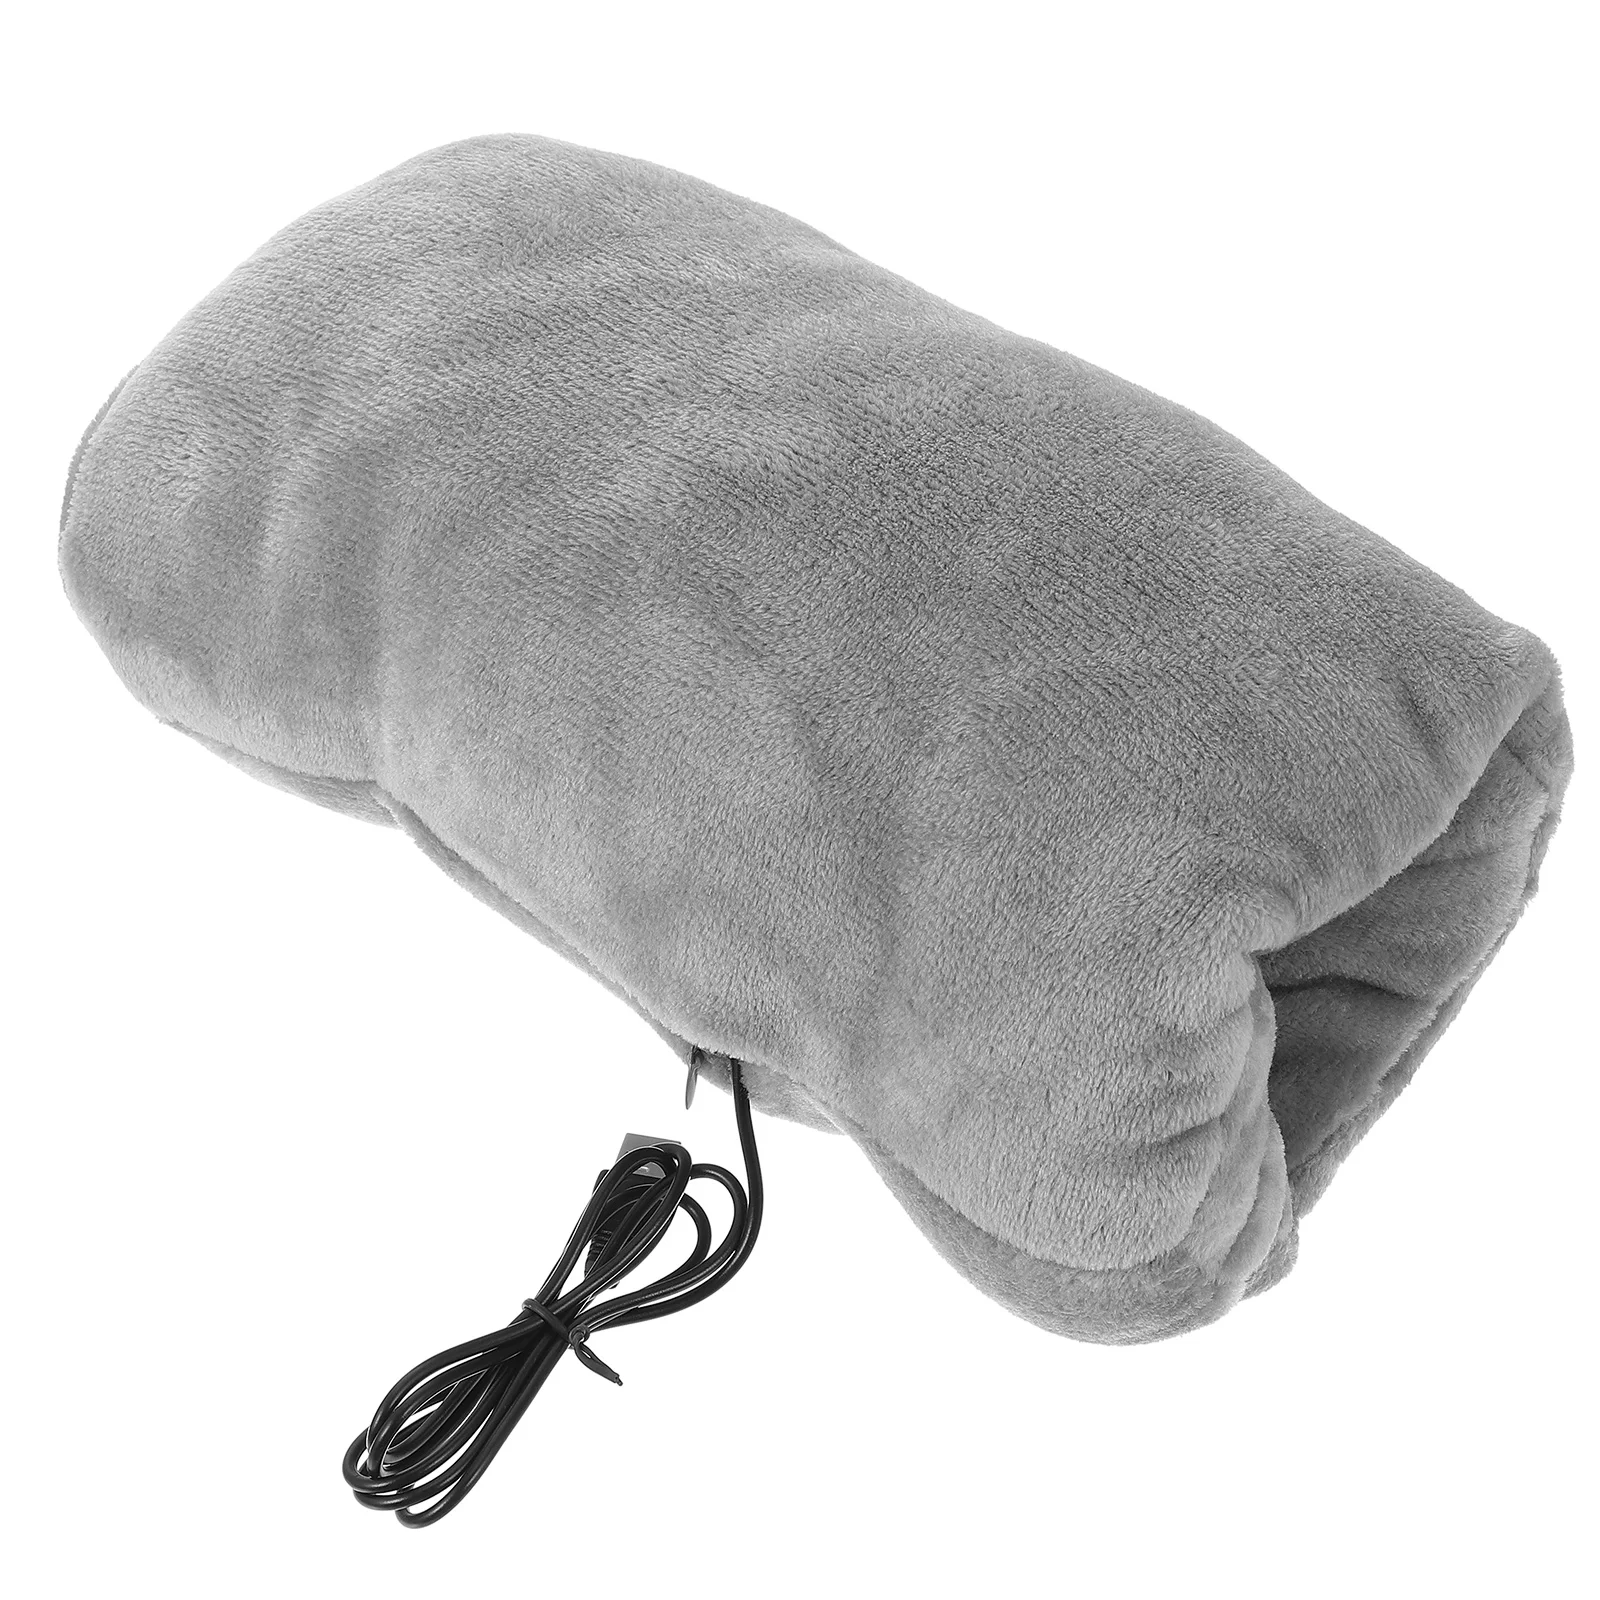 

Hand Warmer Pillow The Older Heating Plug-in Electric Winter Hands Thick Flannel USB Charging Grey Hot Pad Rechargeable